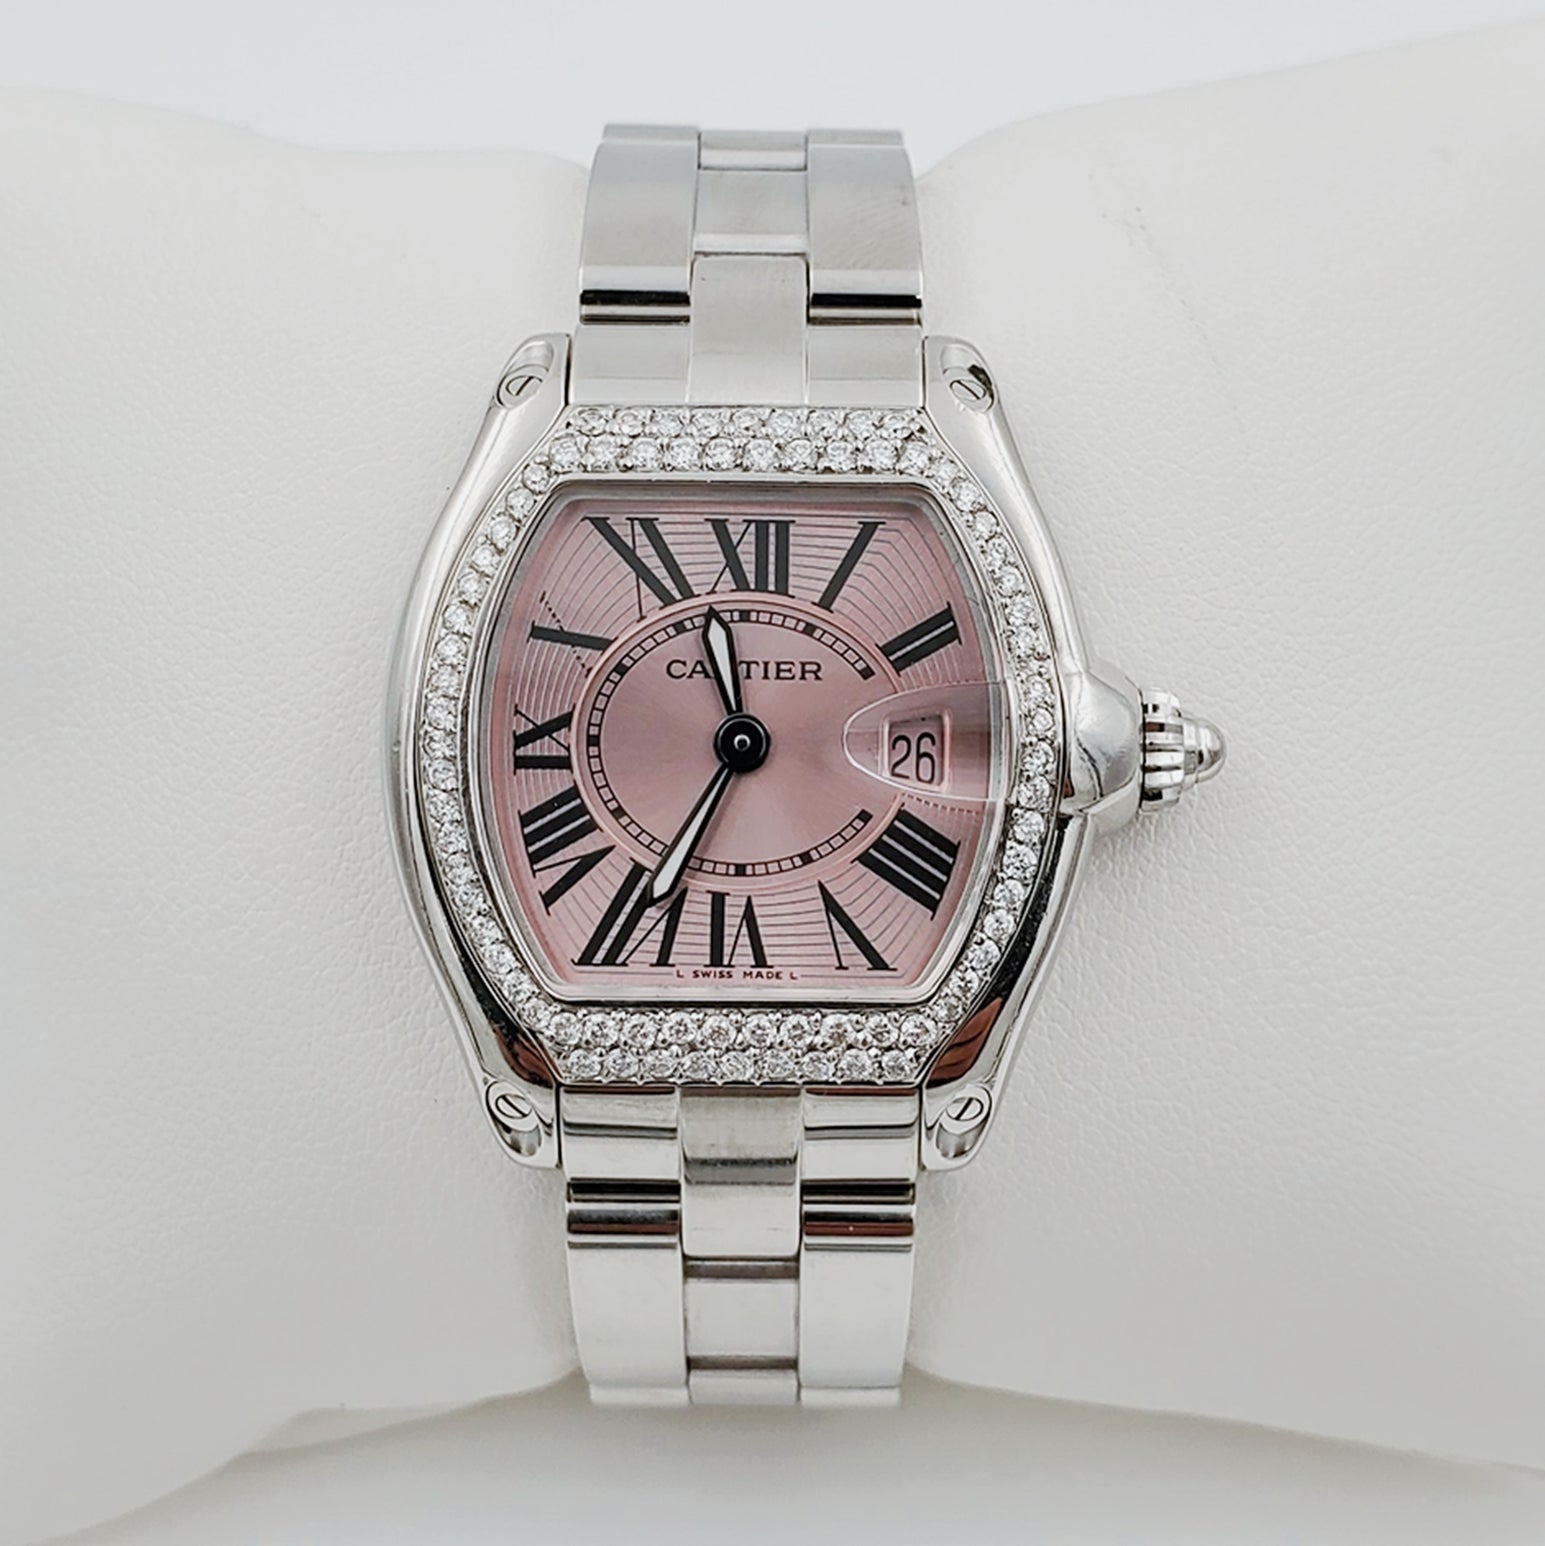 Ladies Medium Roadster Cartier Stainless Steel Roadster Watch with Diamond Bezel. (Pre-Owned W62016V3)